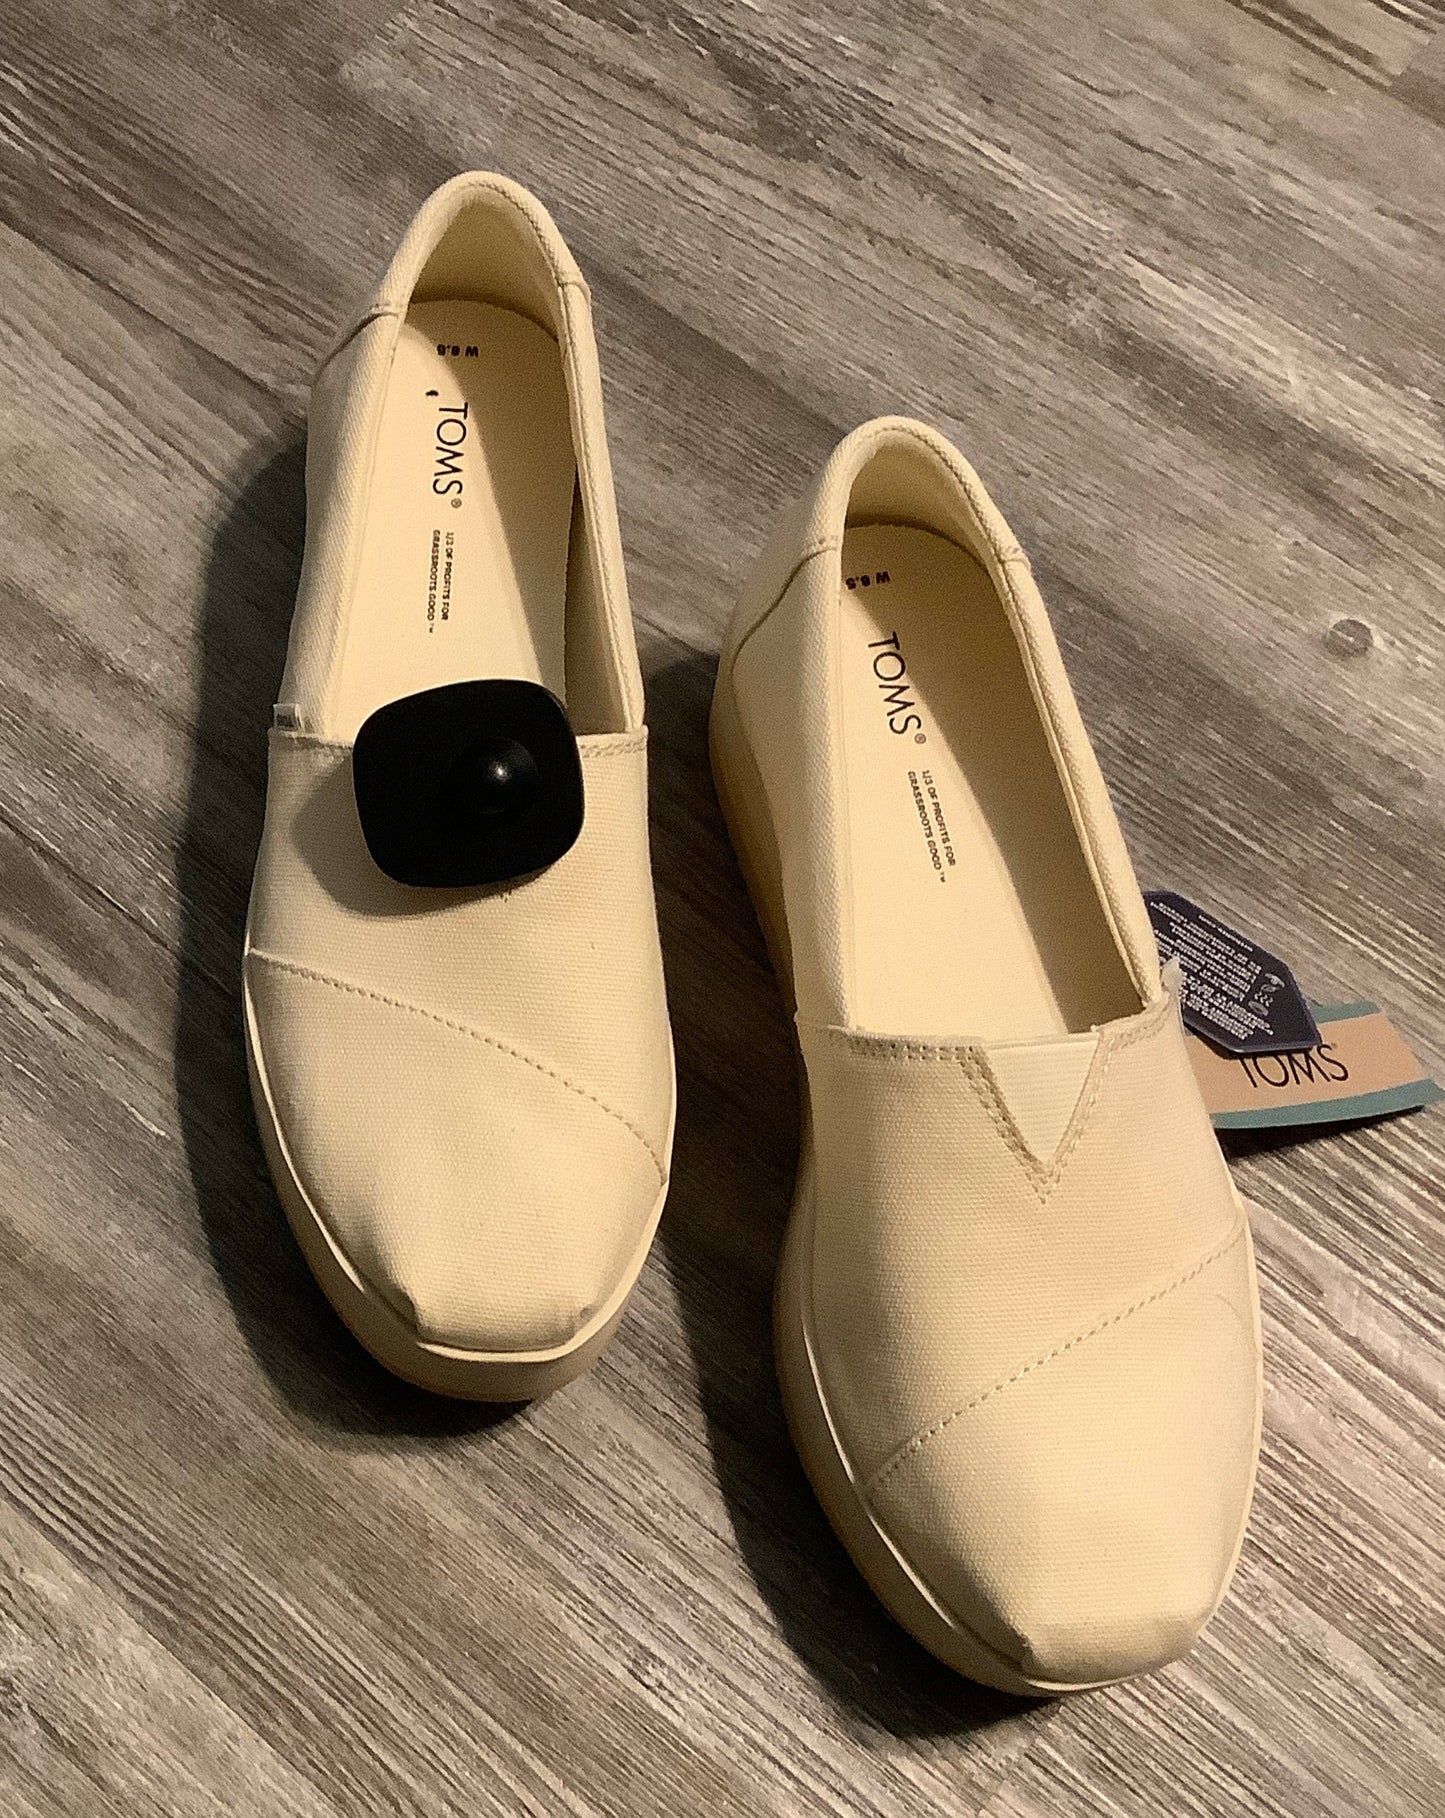 Shoes Sneakers Platform By Toms  Size: 8.5